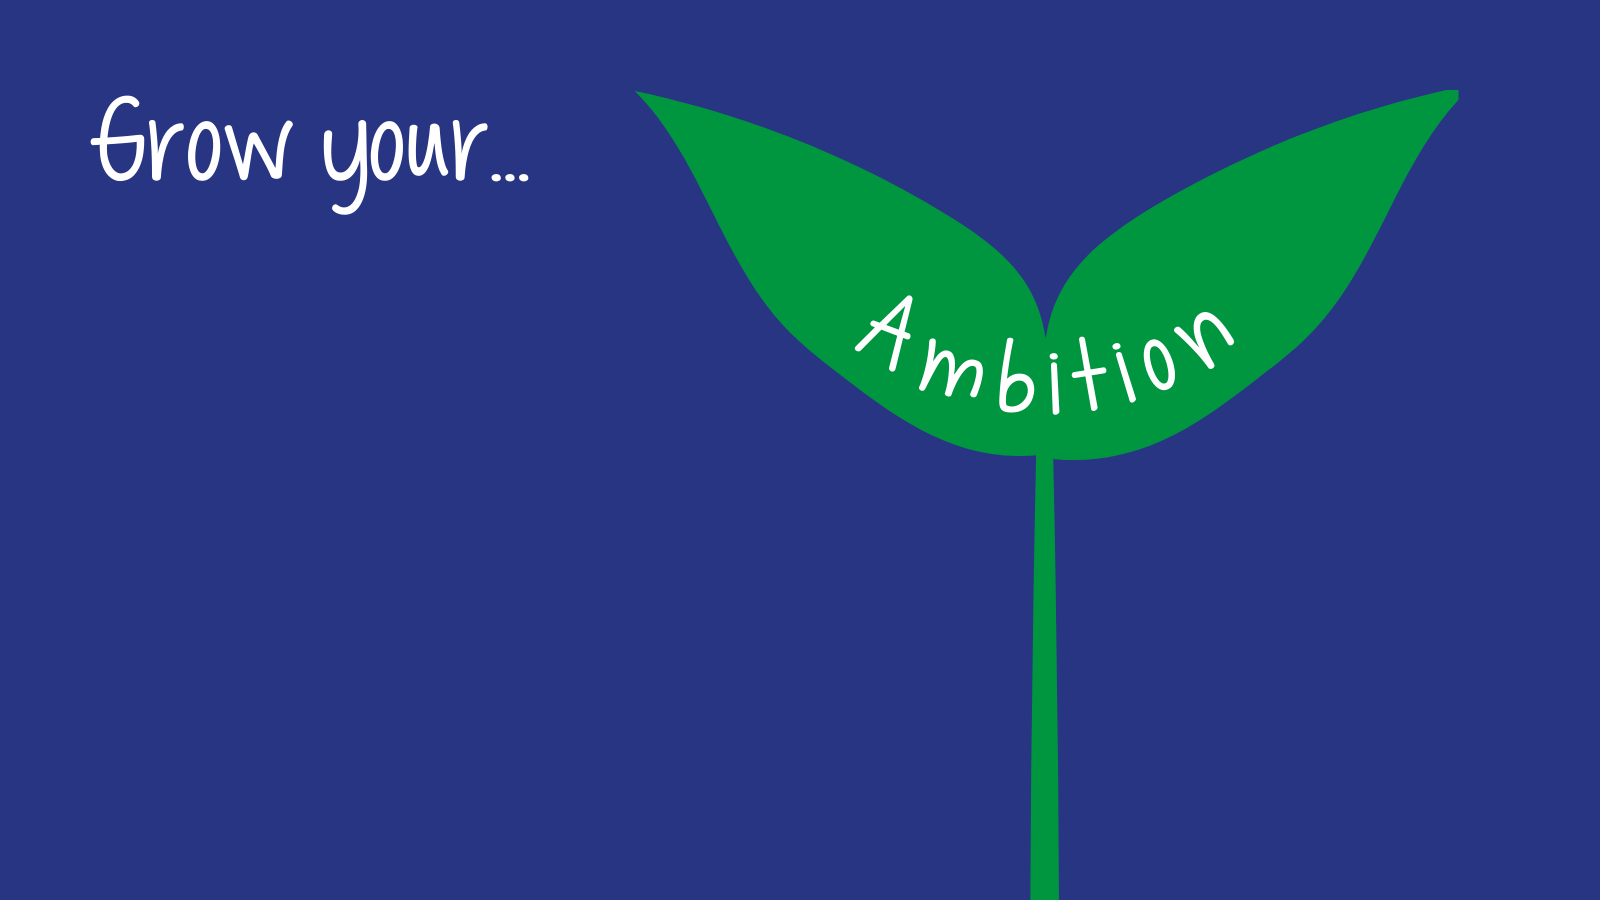 Grow Your Ambition With Our Friendly Team!